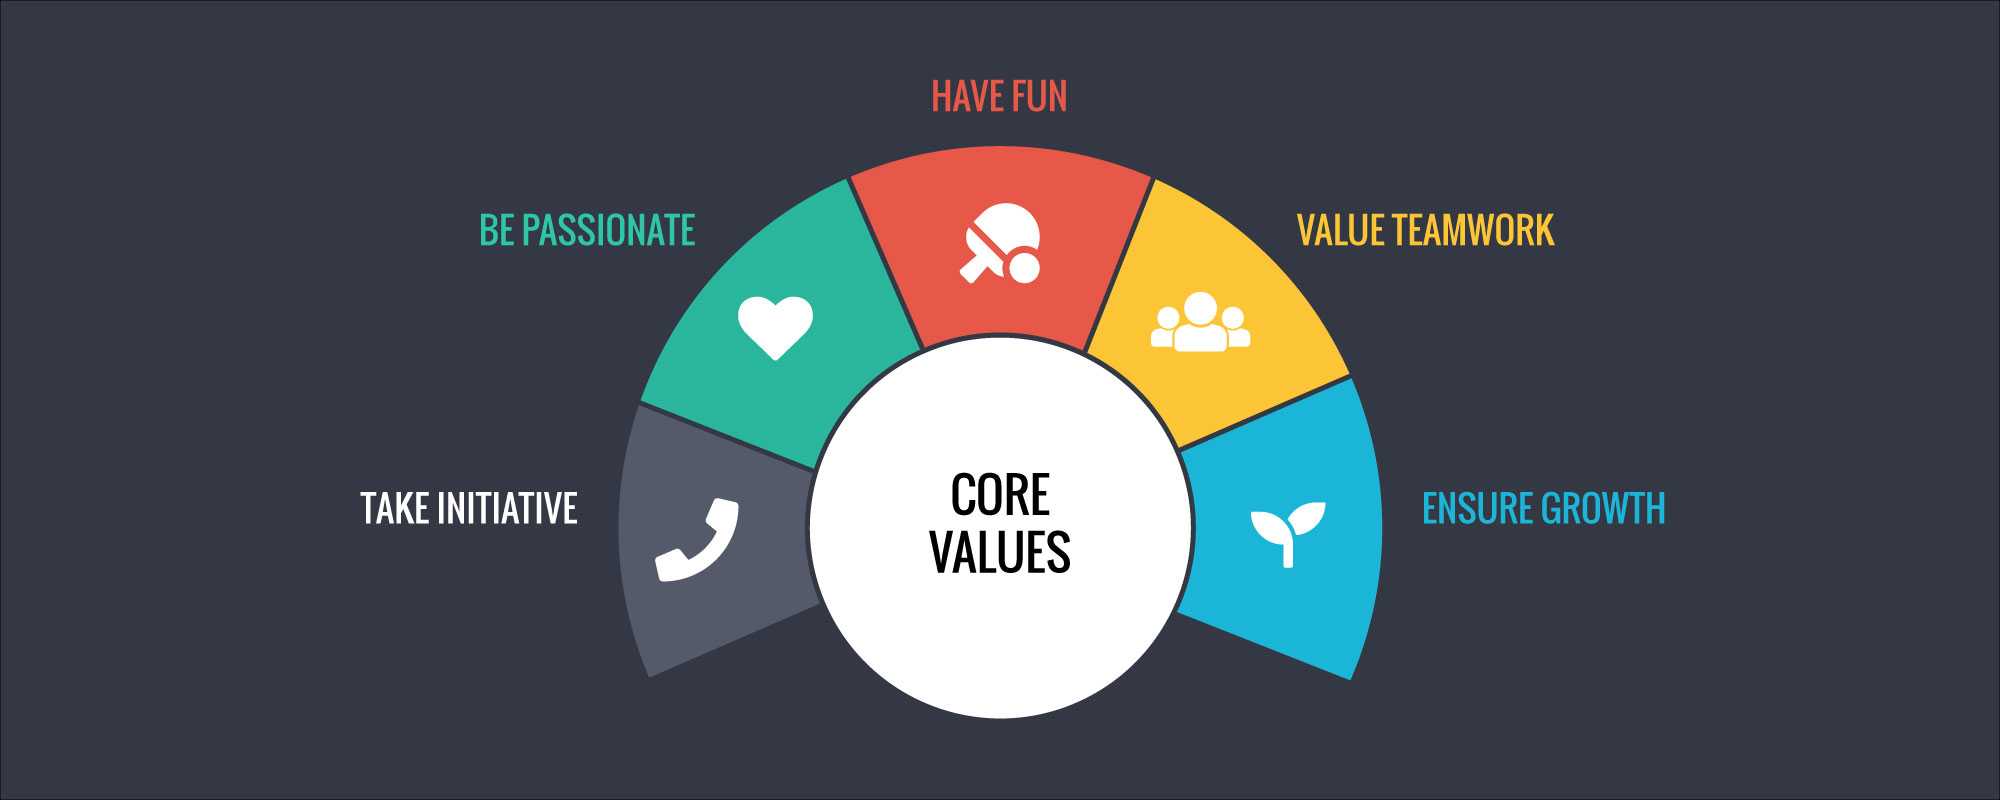 Core Values are a Labor of Love: How Your Business Can Create Them